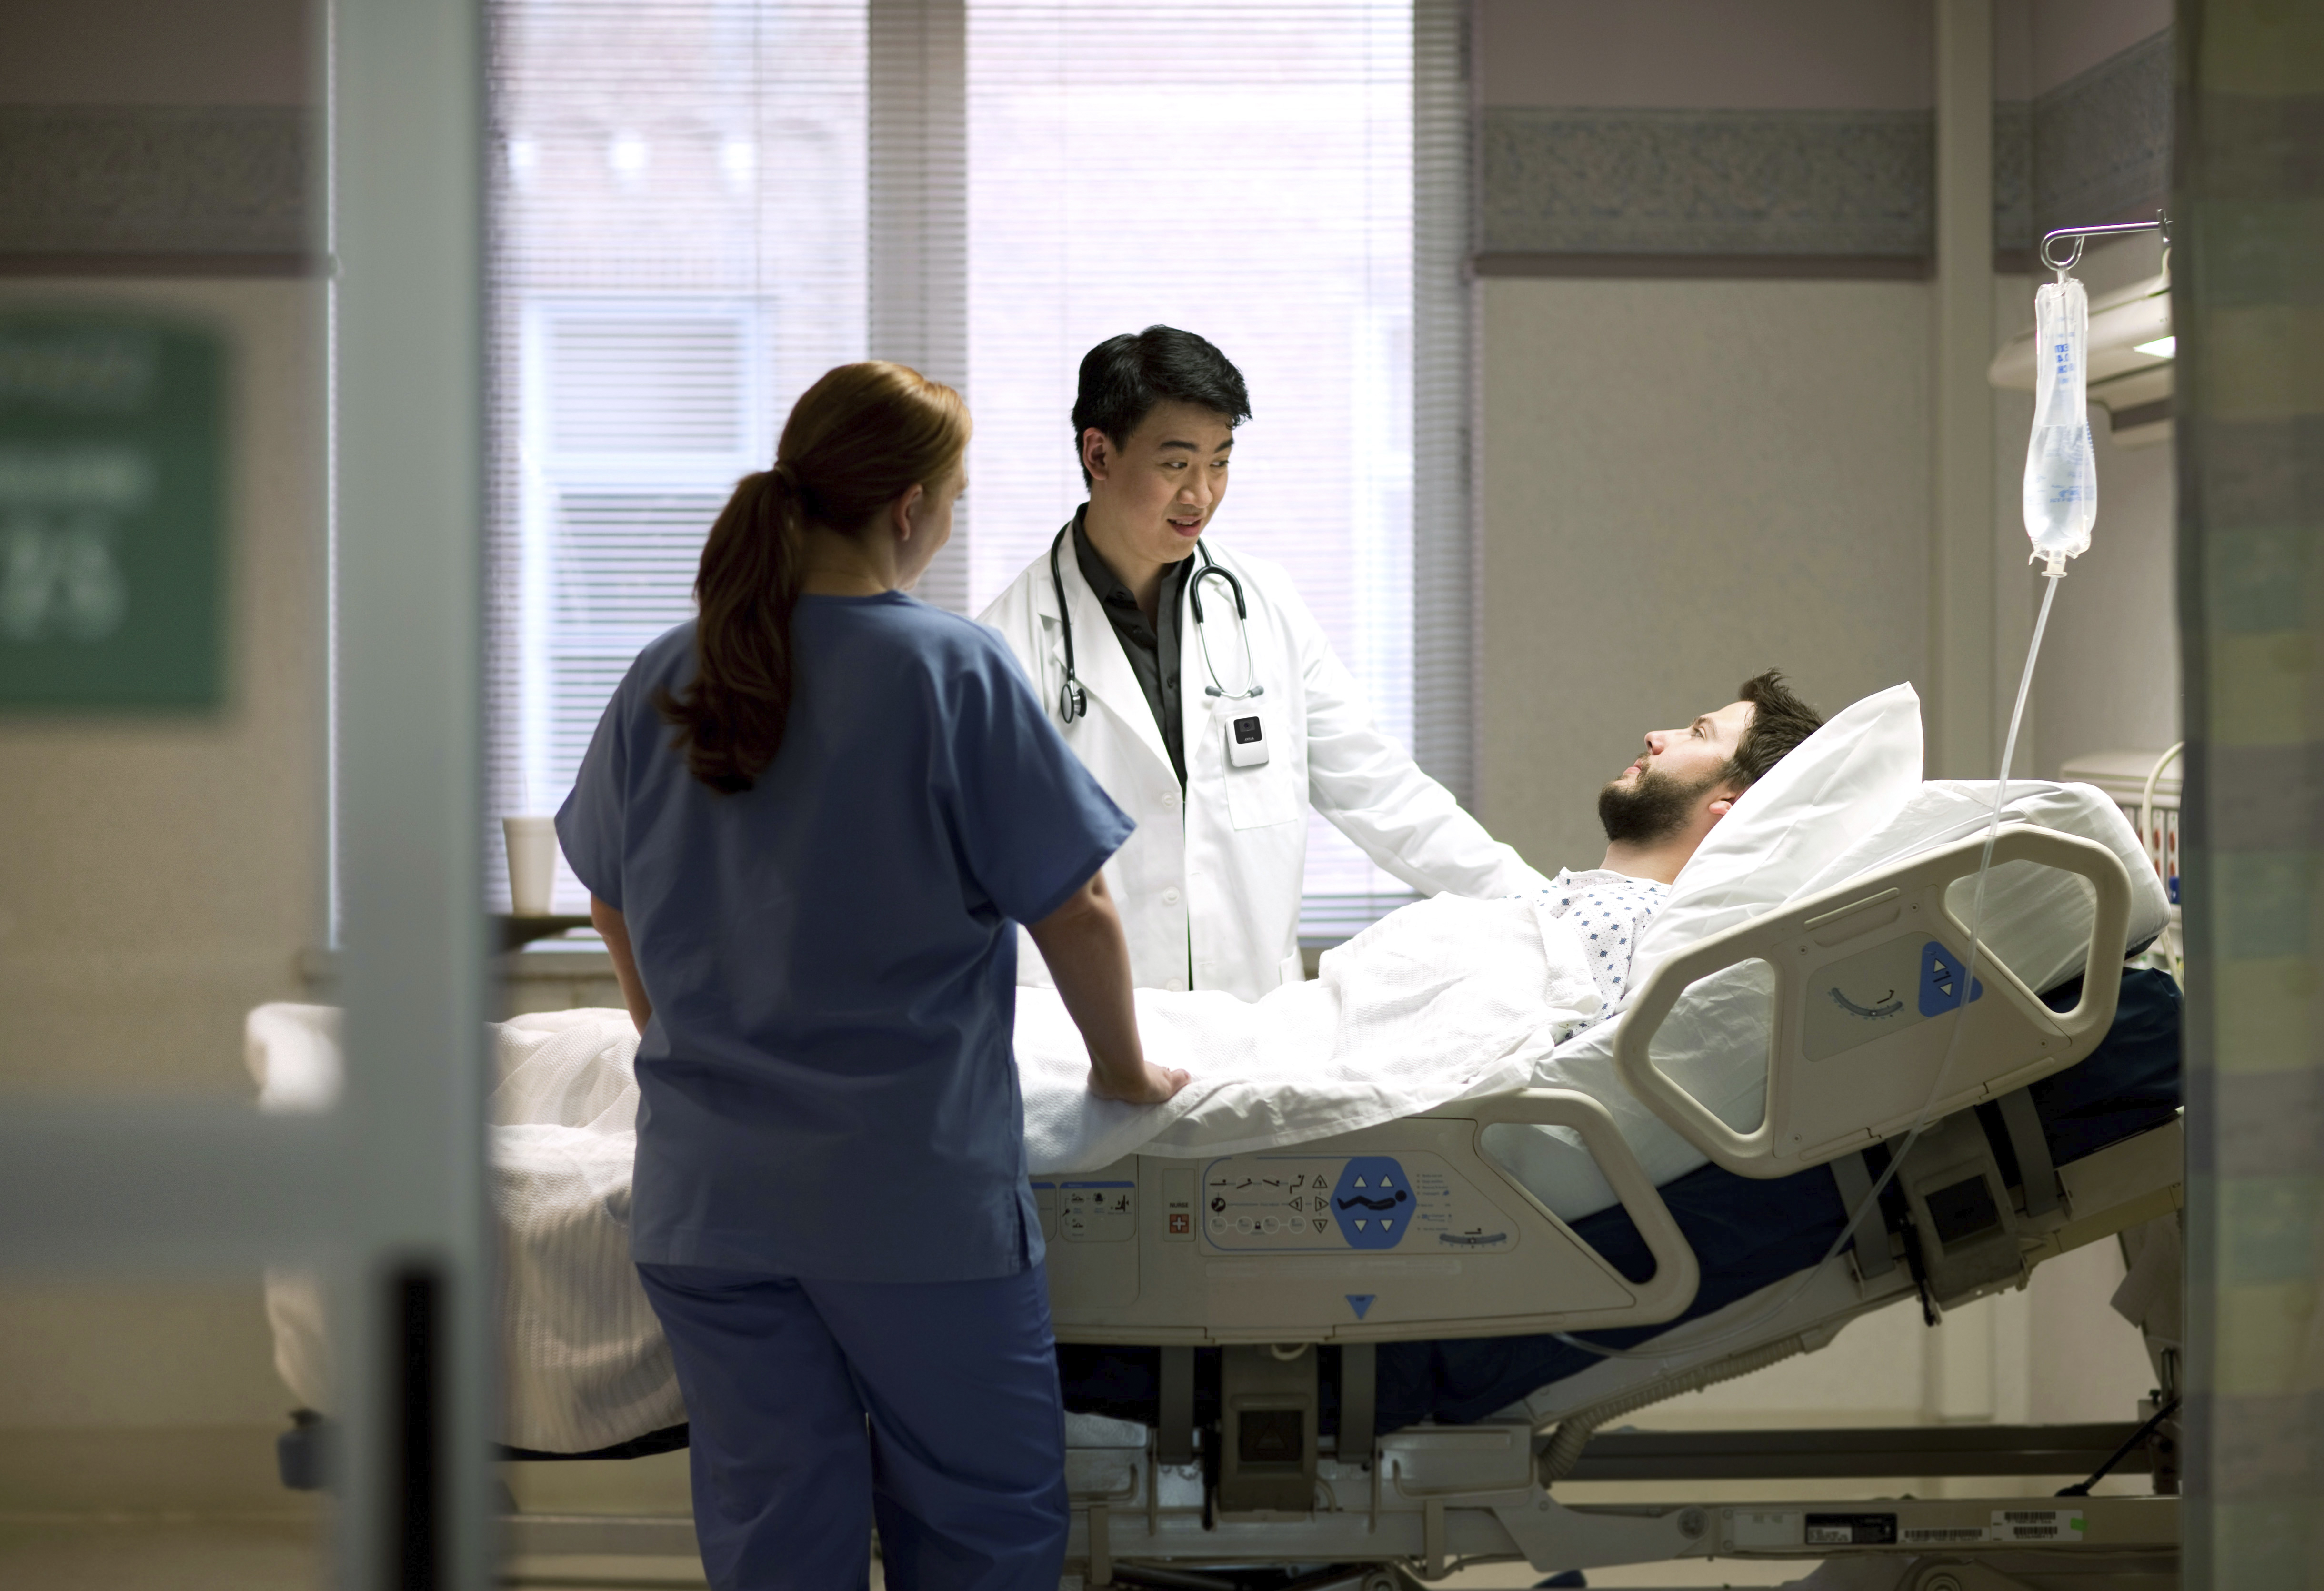 Doctor and nurse talking to patient in hospital